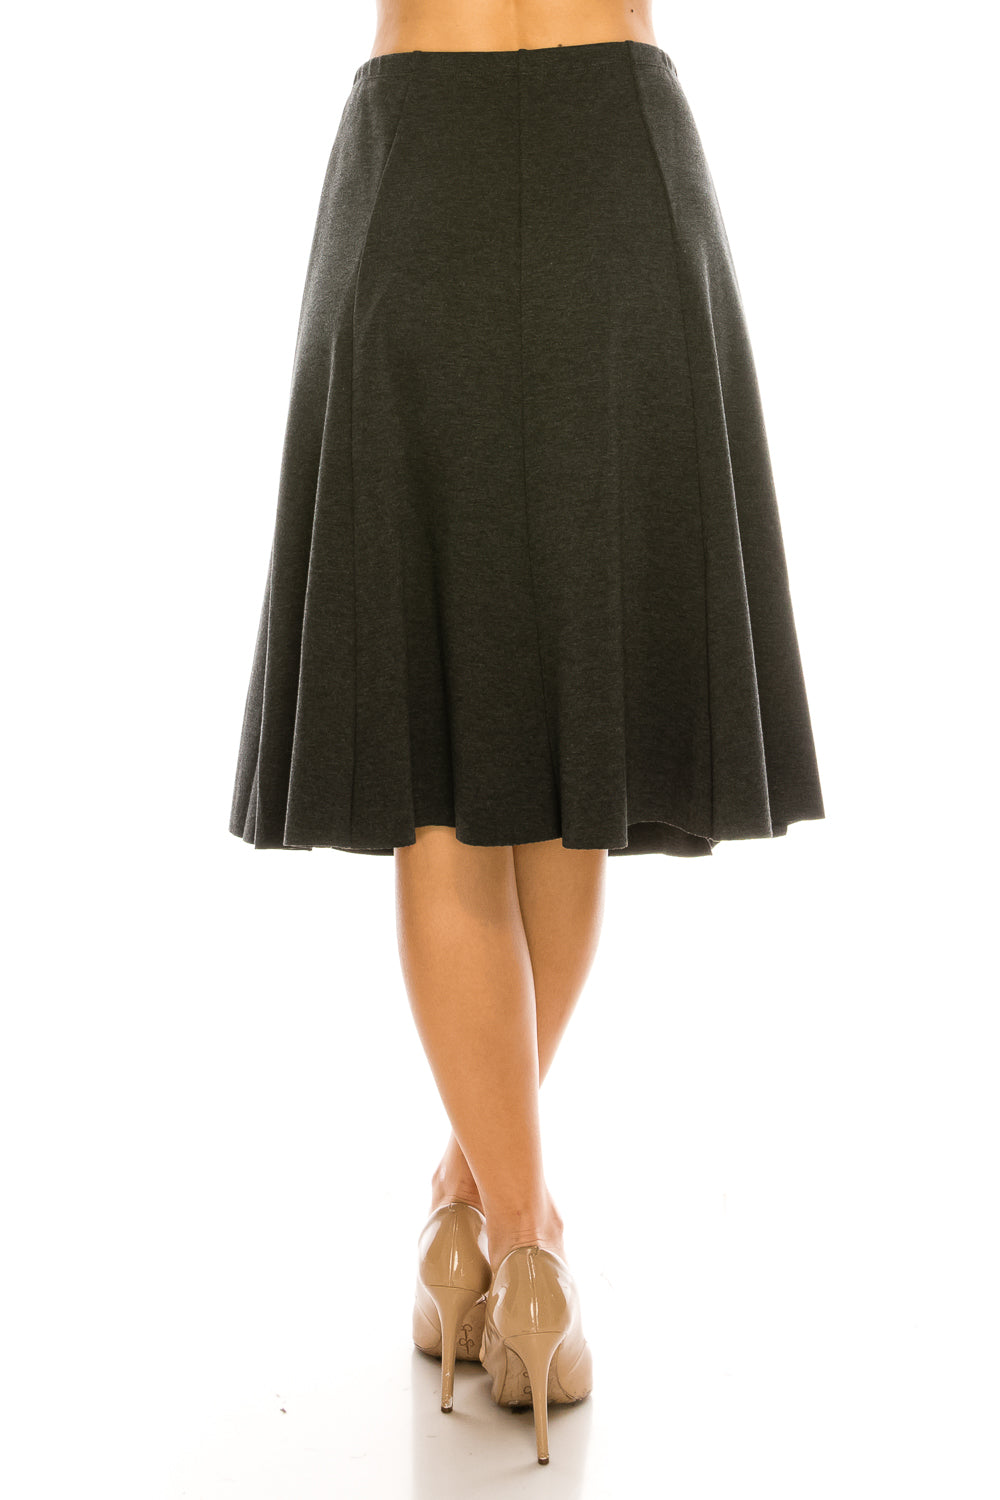 Seven Panel A-Line Below The Knee Midi Skirt - CHI-CHI NYC